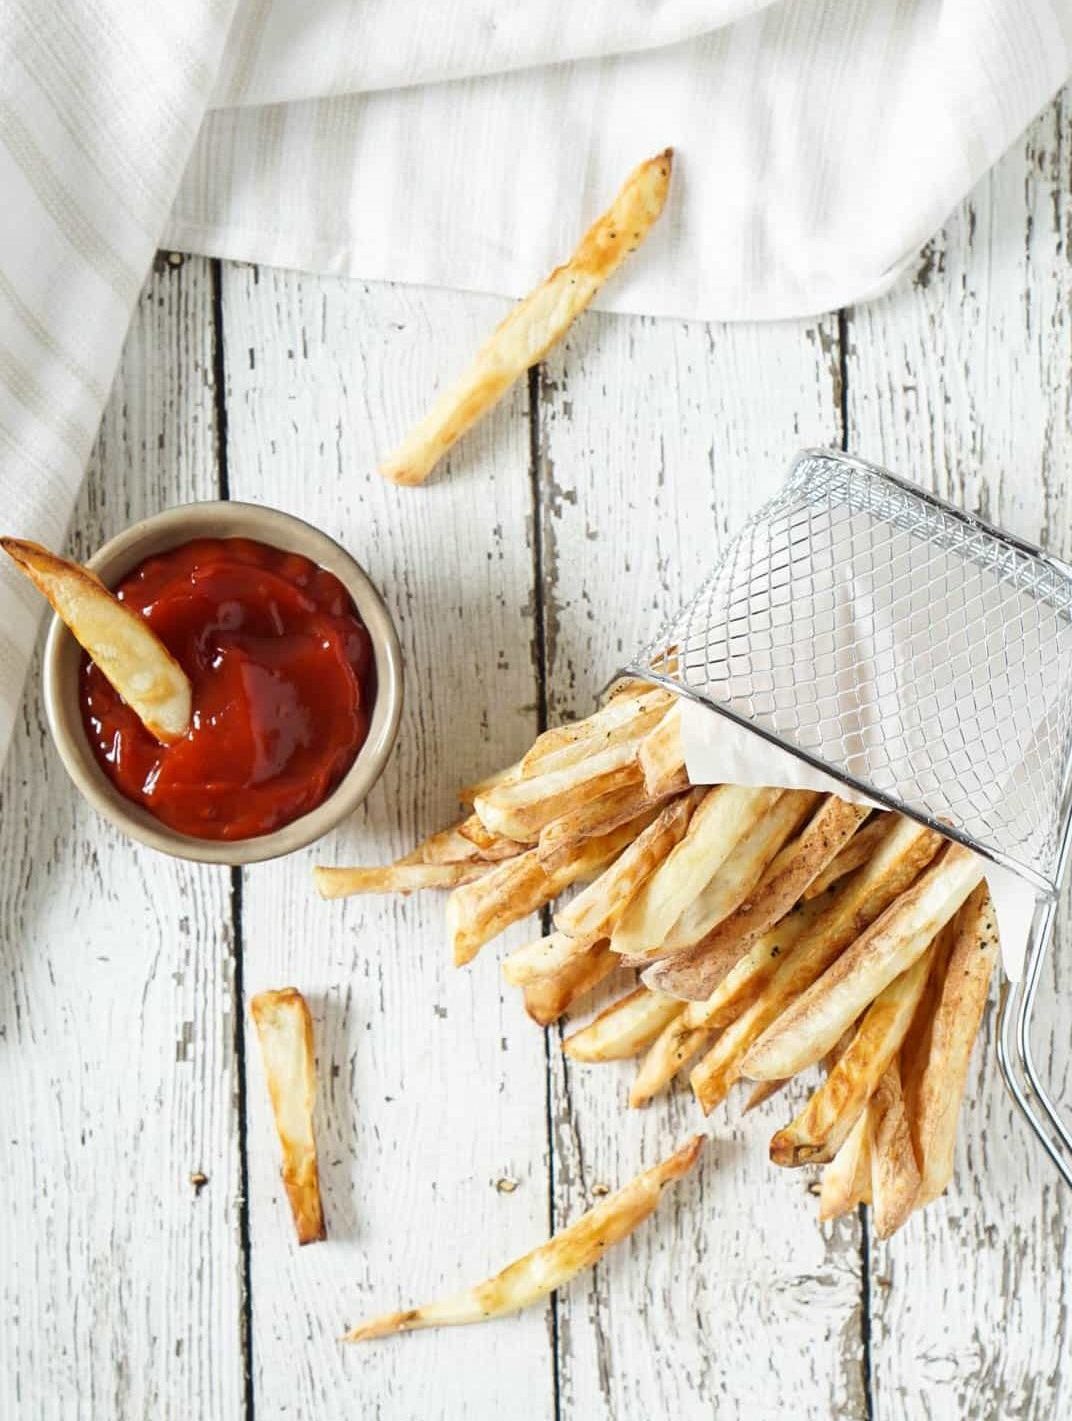 french fries spilling out of a basket with ketchup